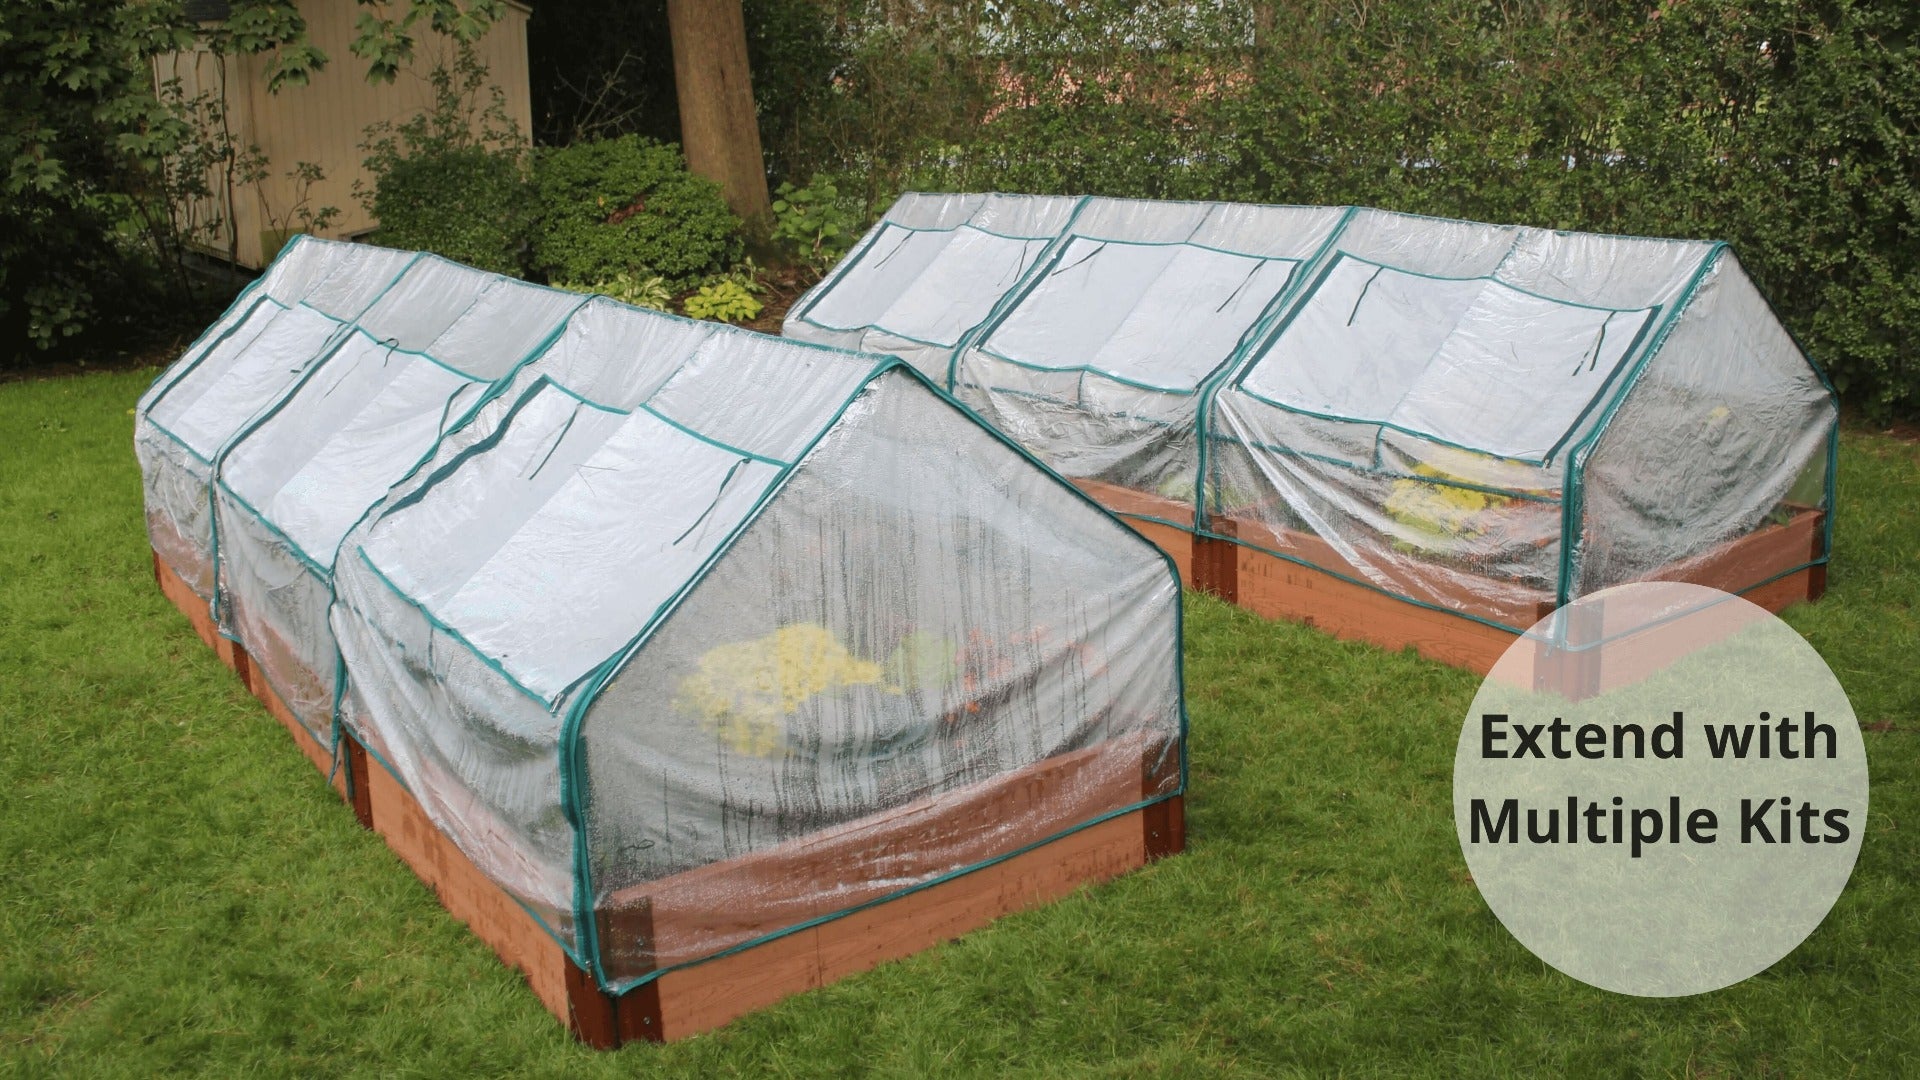 Cold Frame For Raised Bed - The 4 x 4 ‘Greenhouse’